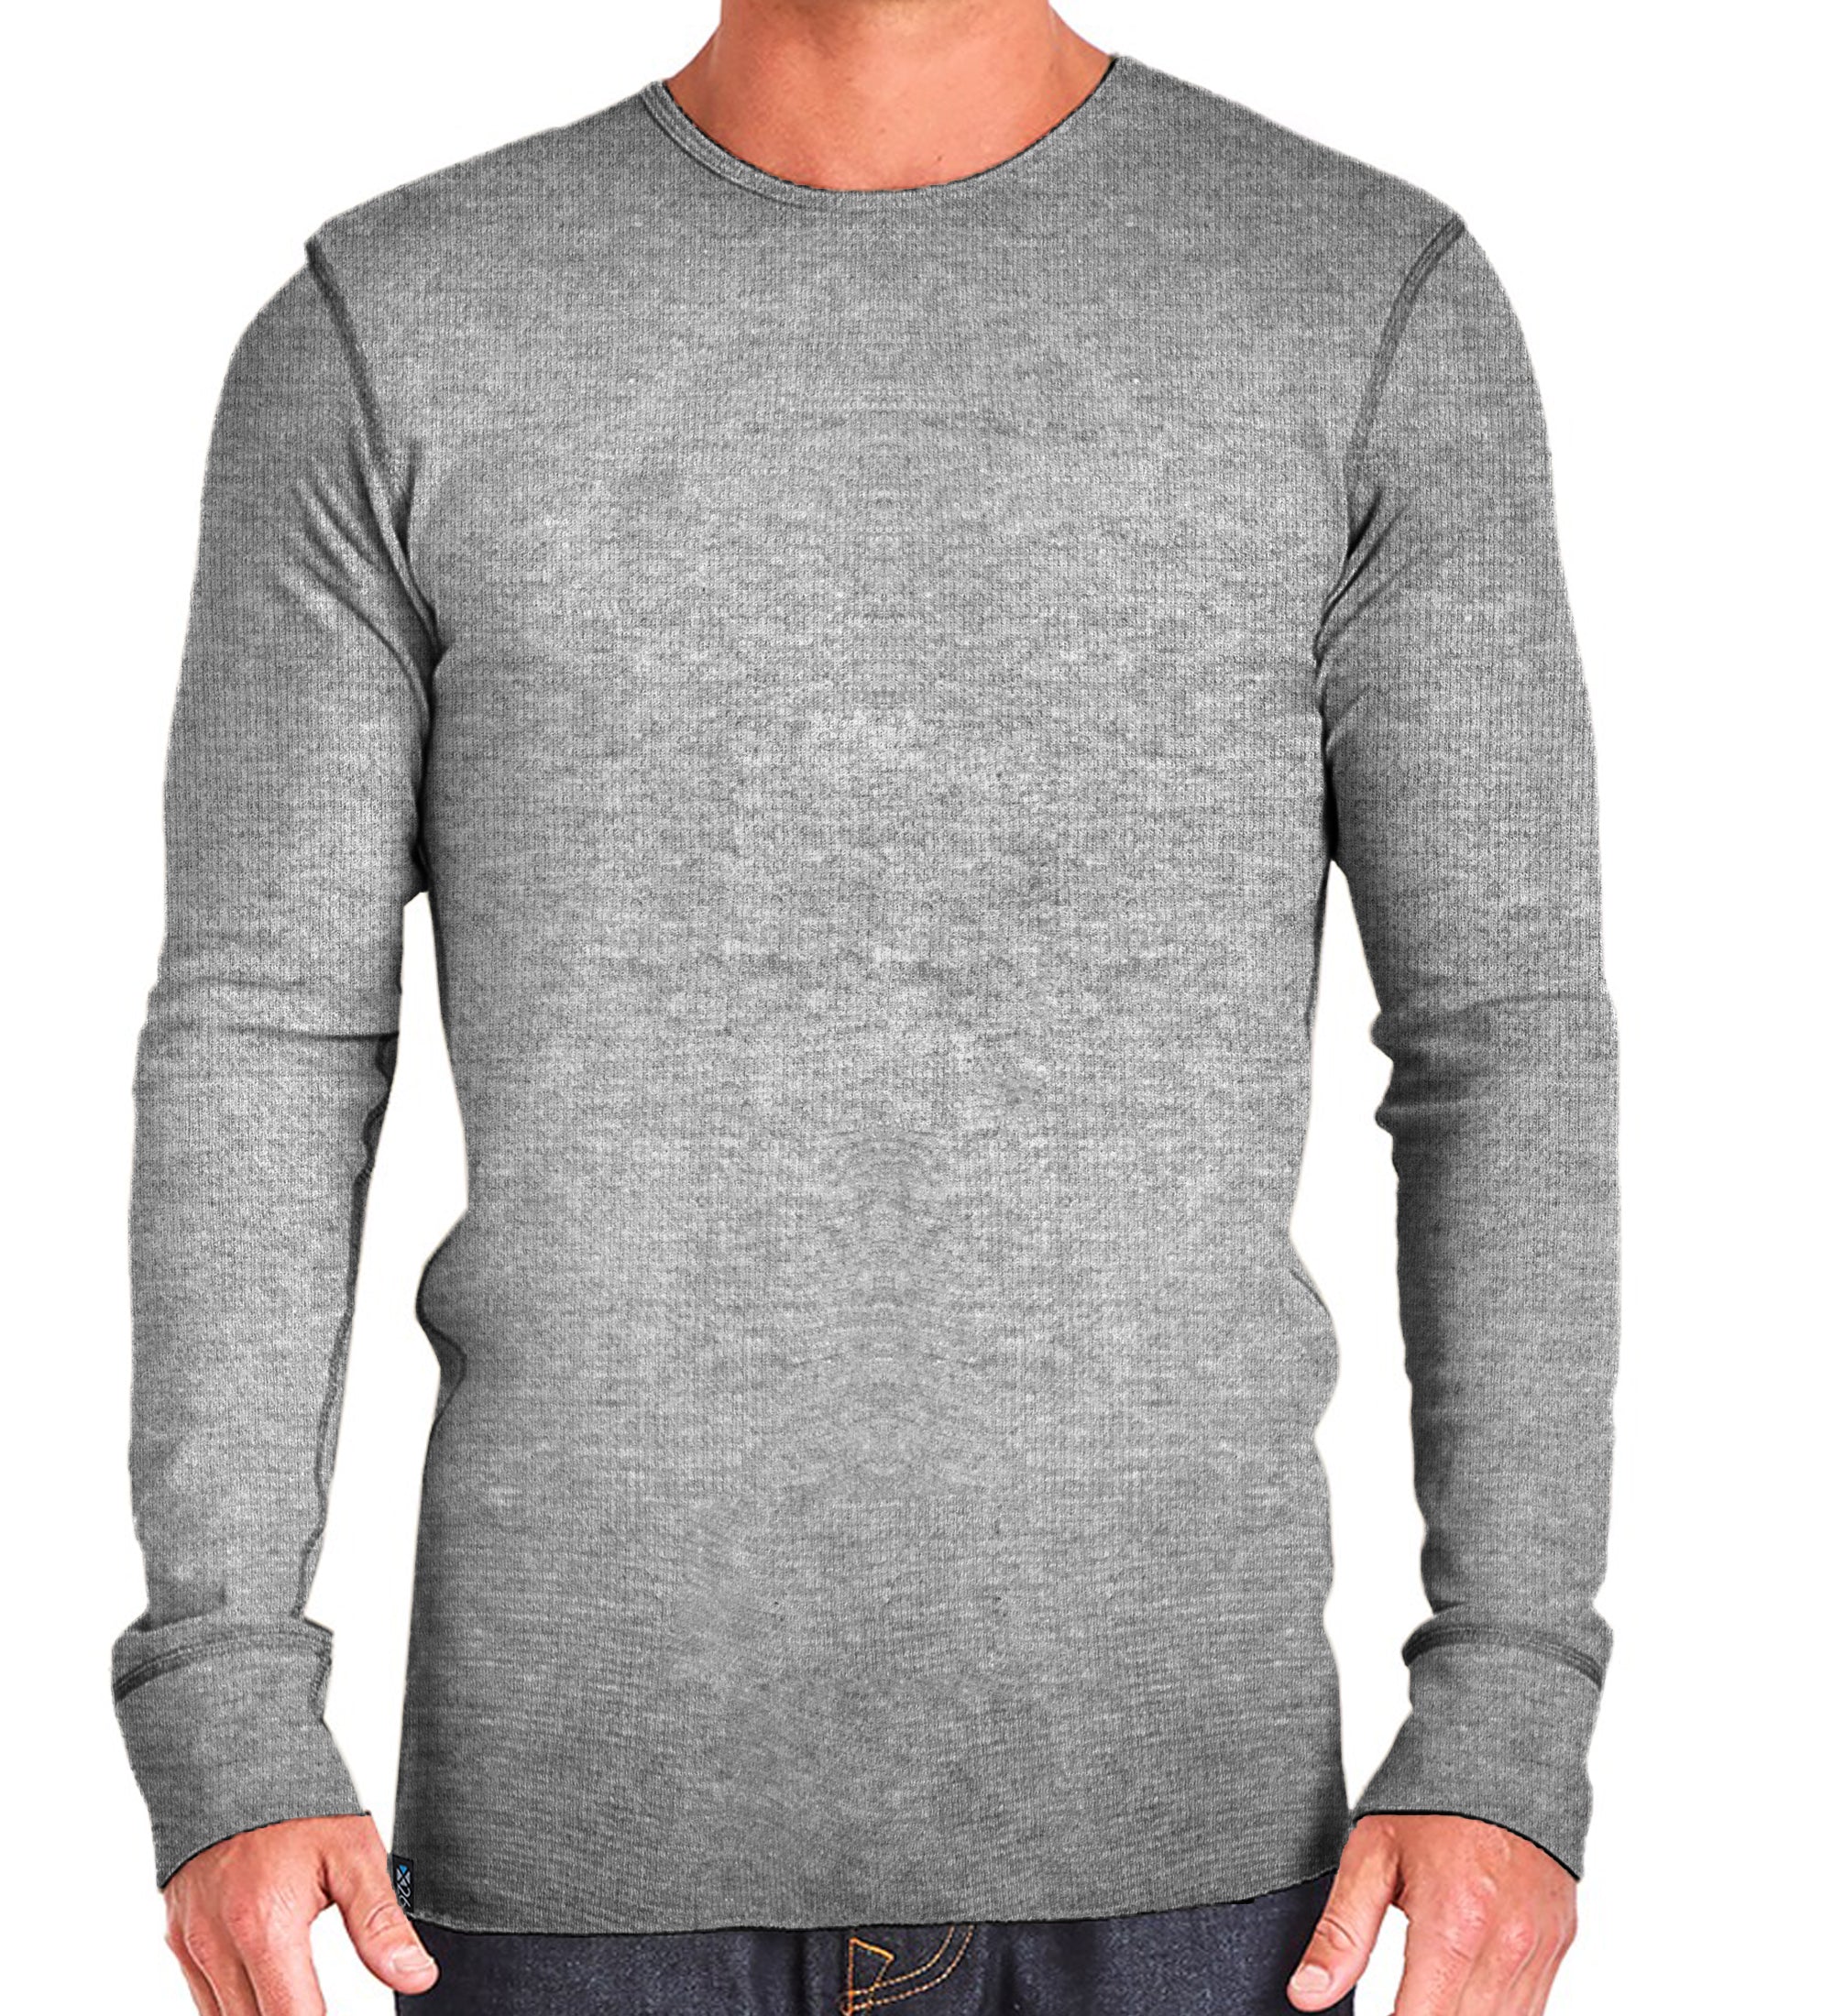 Thermal Waffle Knit Crew Neck Long Sleeve T-Shirt